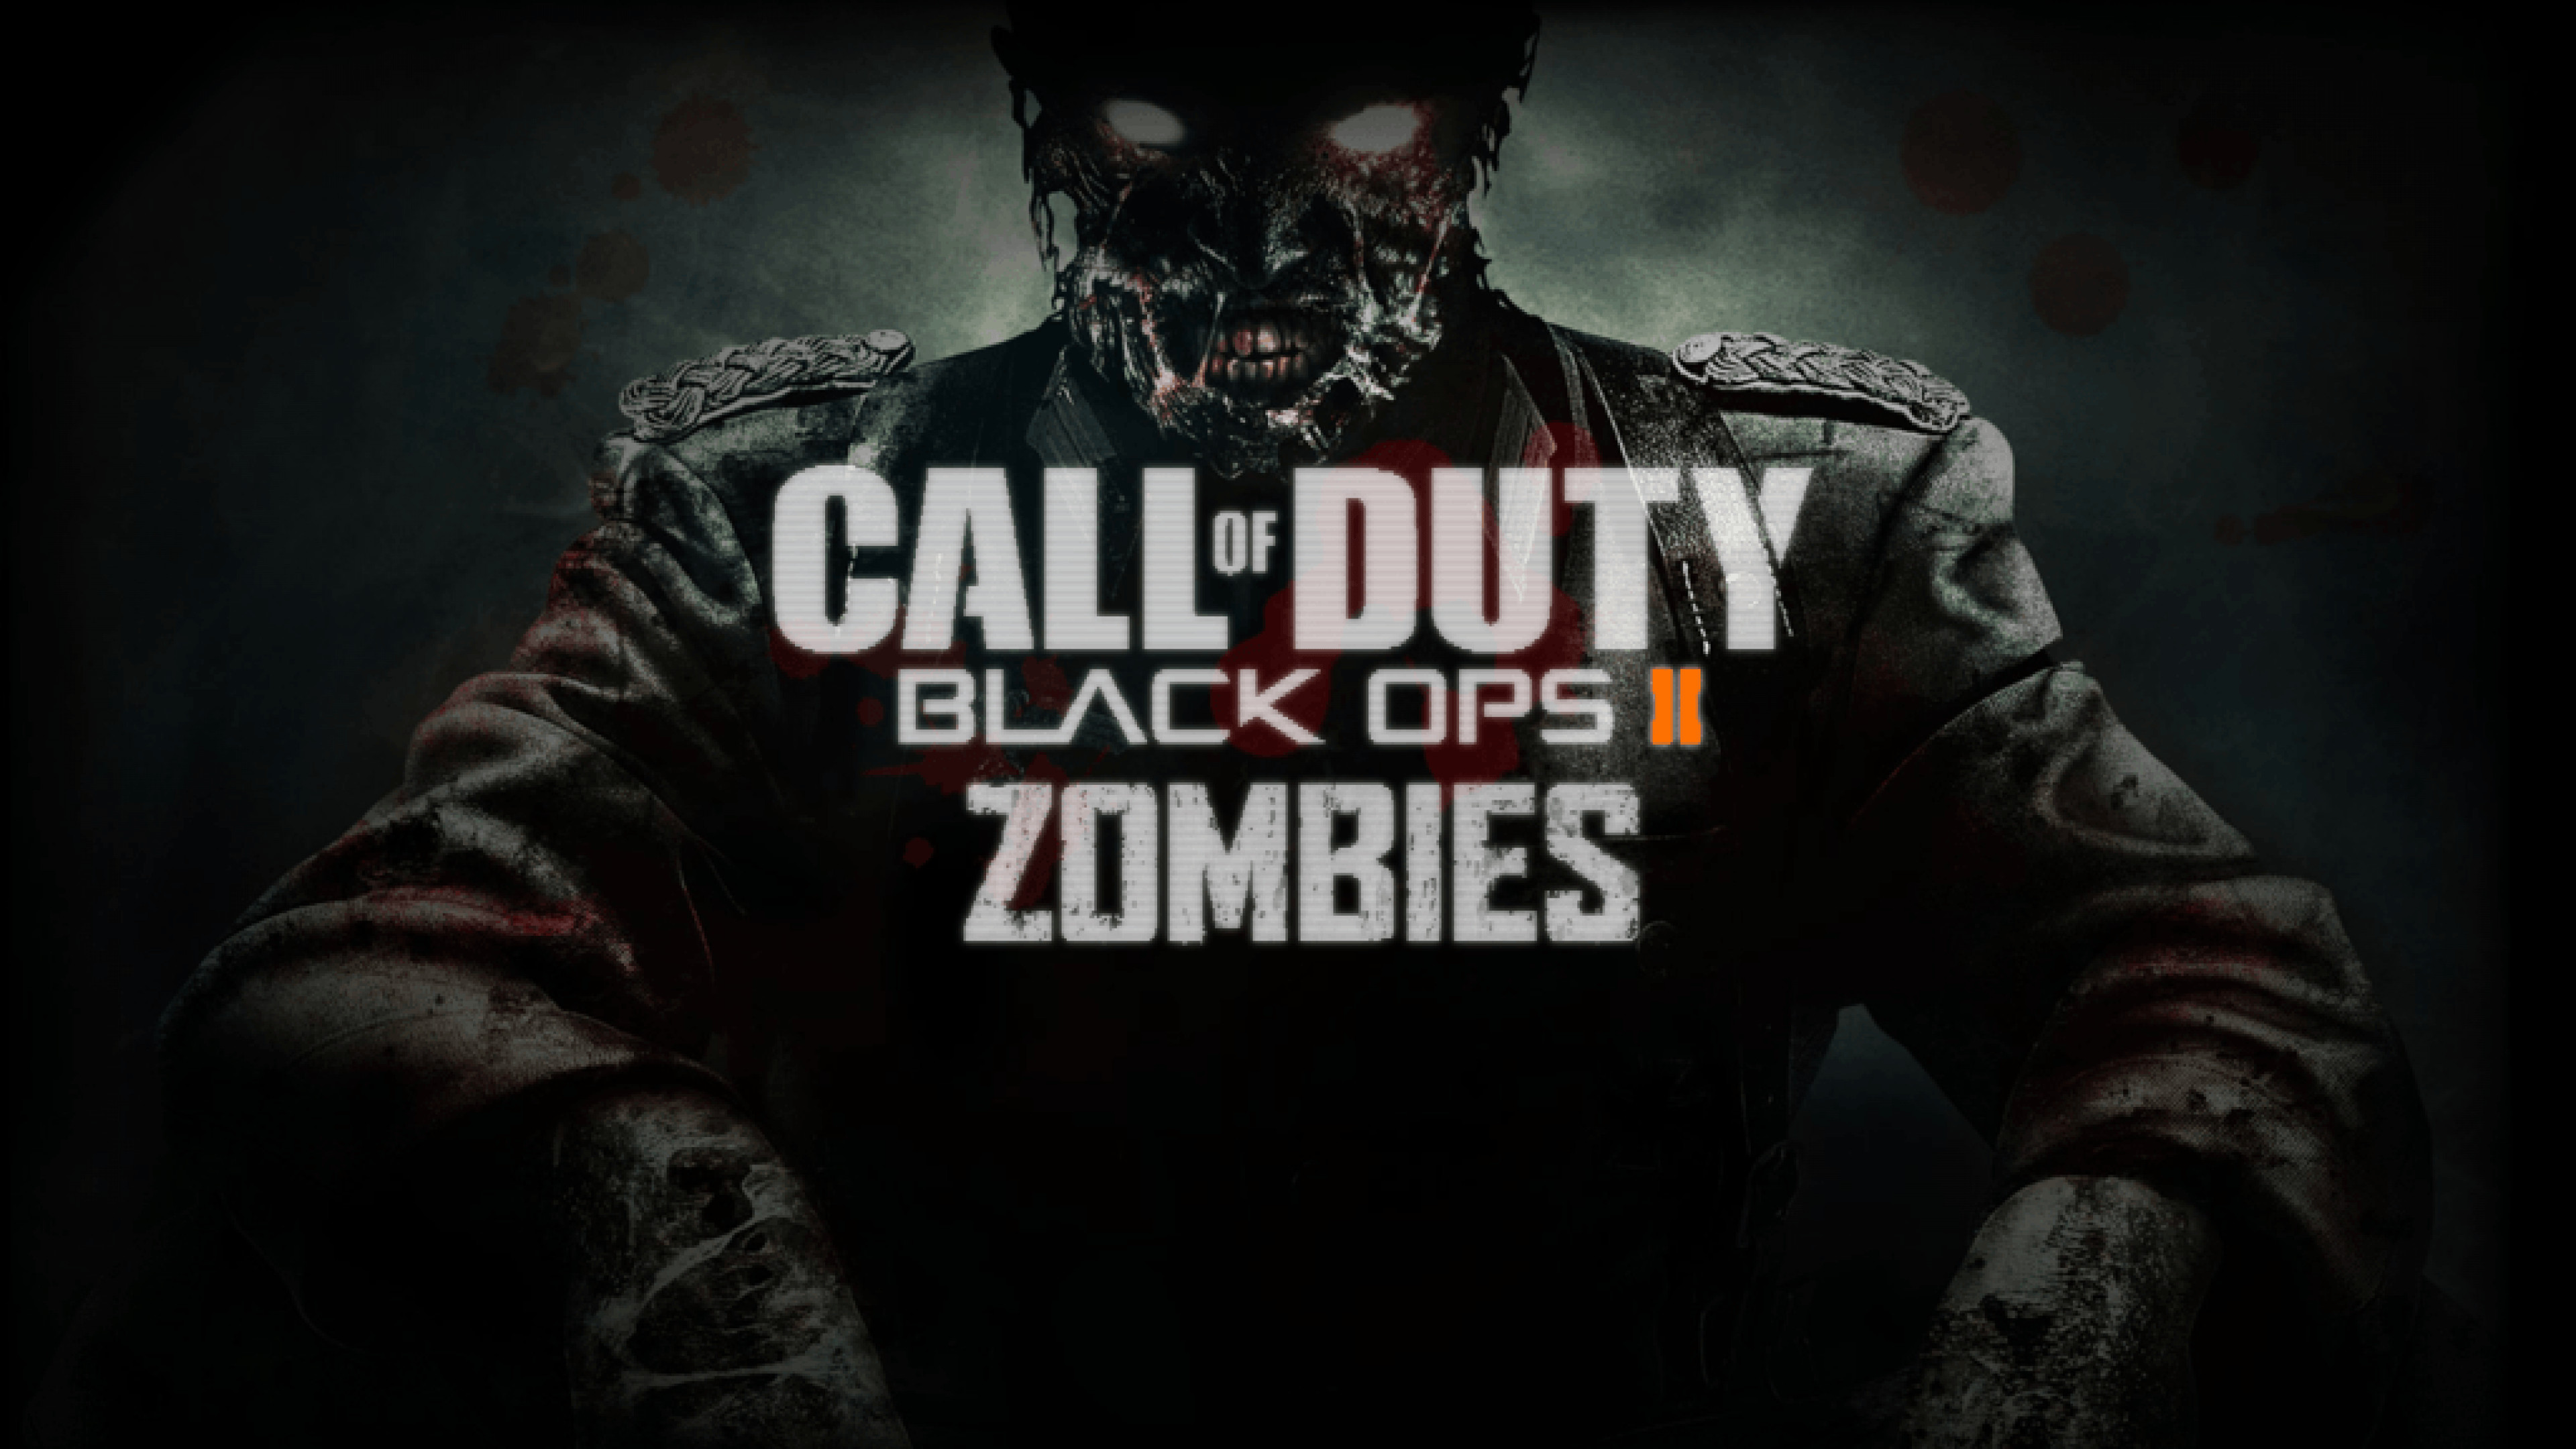 Zombies Wallpaper Black Ops 86 Images